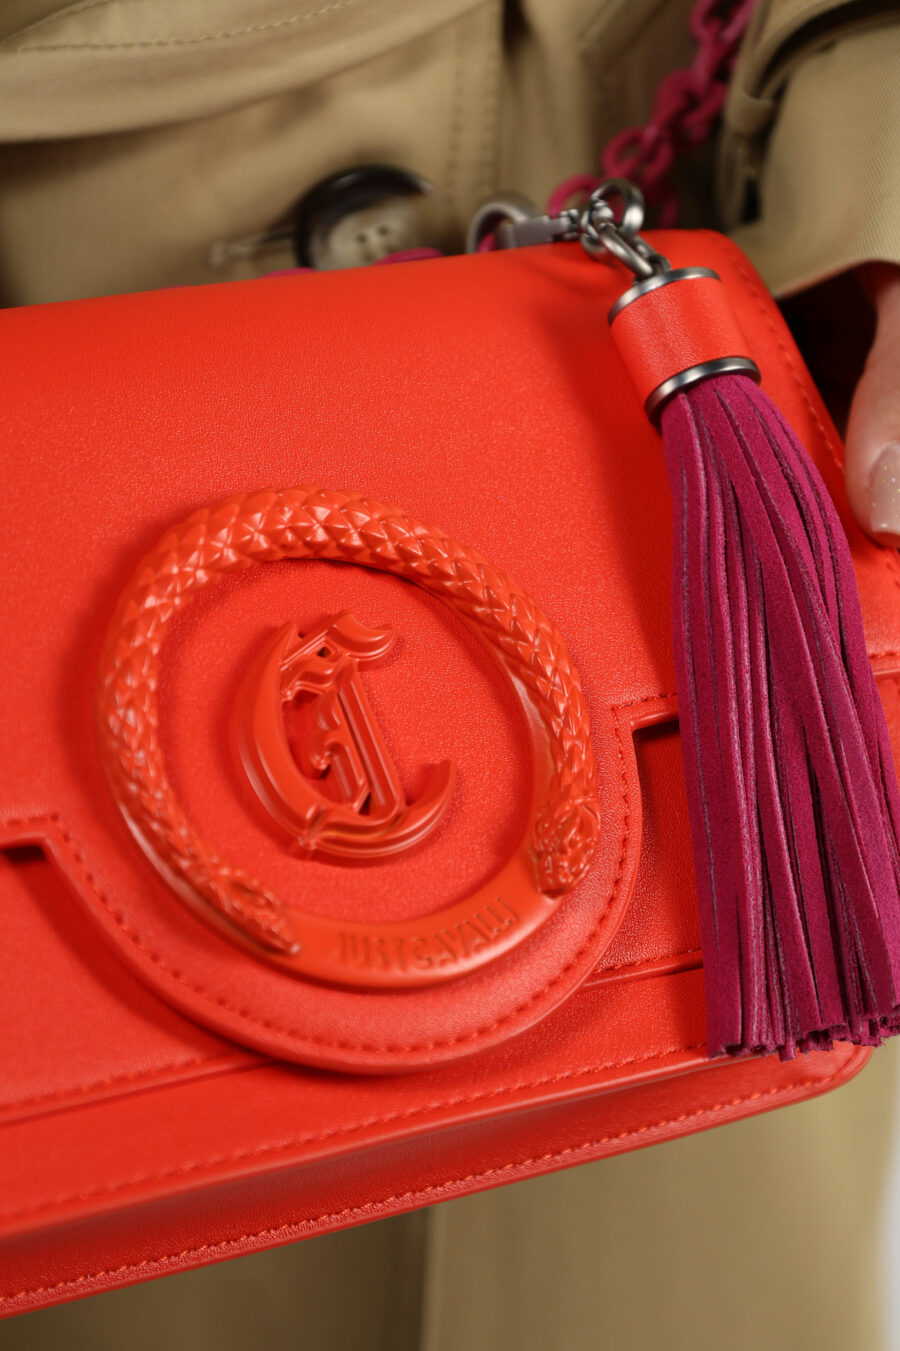 Coral coloured shoulder bag with chain and monochrome circular "c" logo - 109843